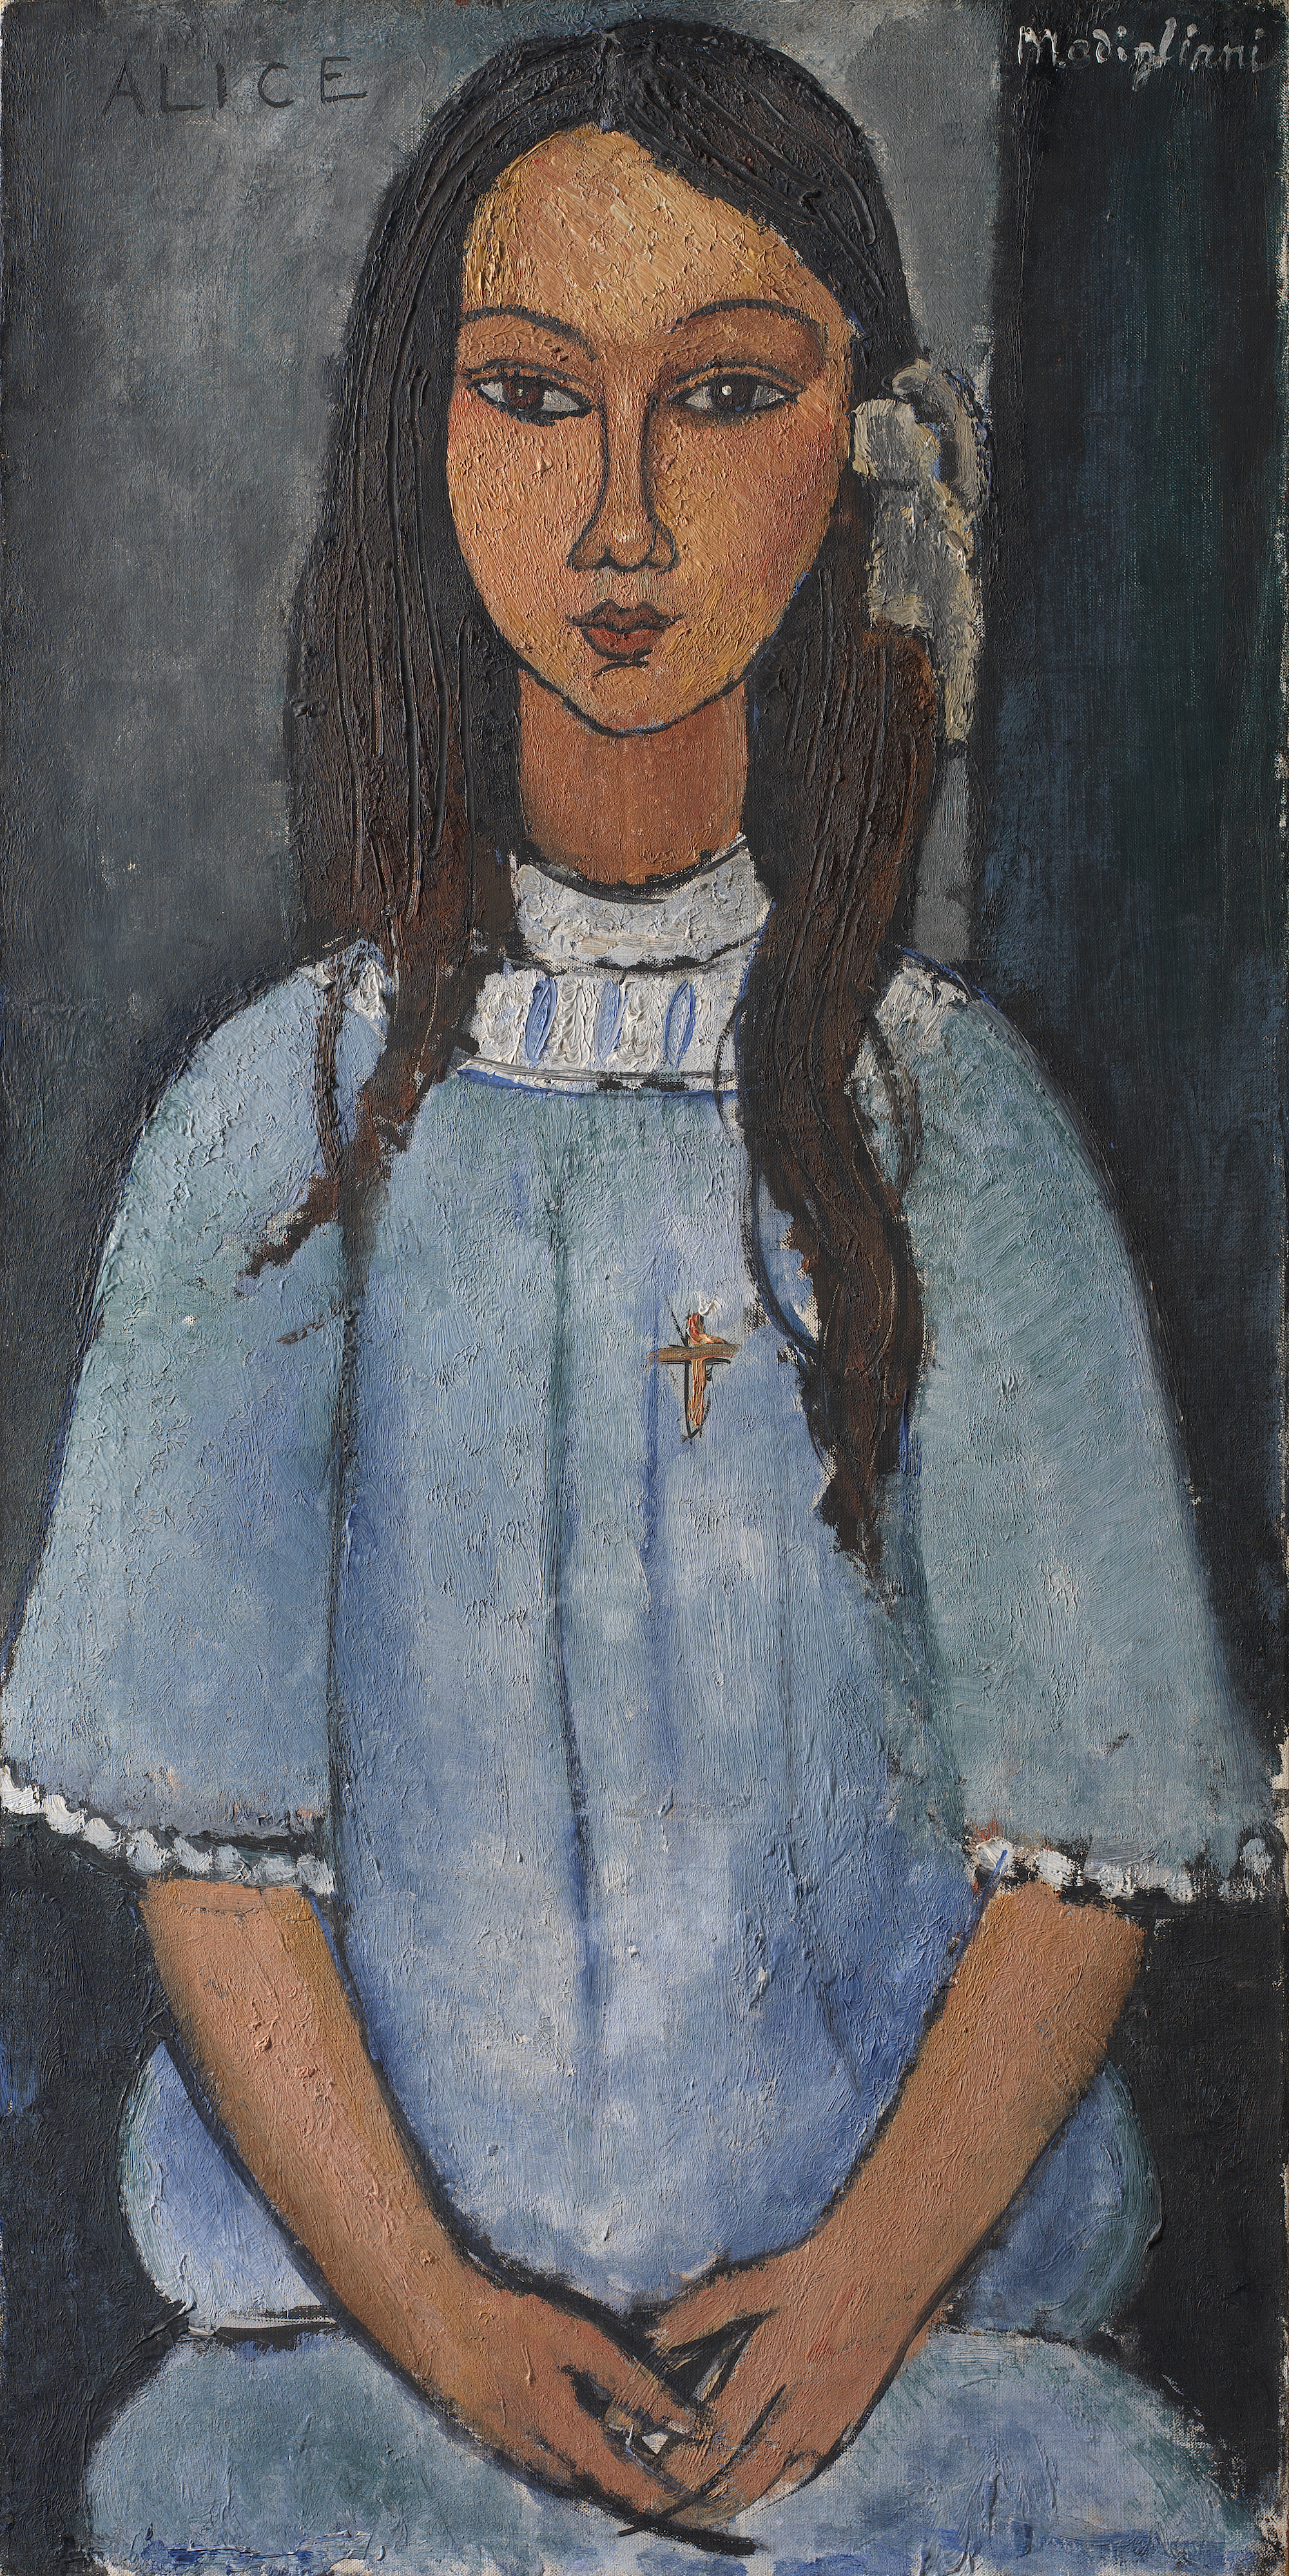 Alice by Amedeo Modigliani - c. 1918 - - Statens Museum for Kunst